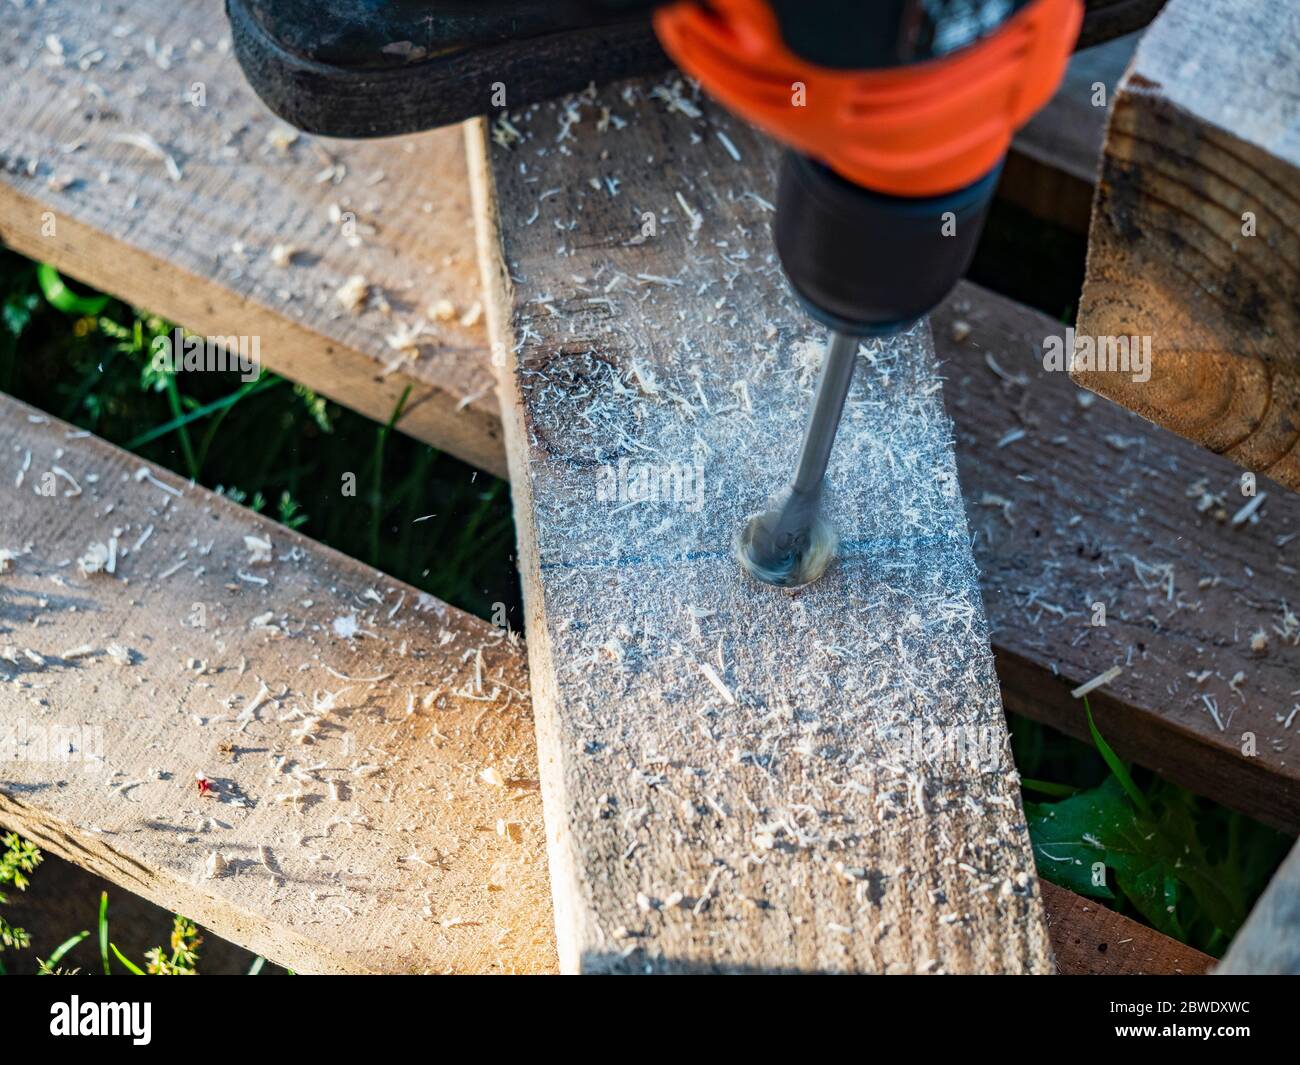 Making holes in a pine beam using an electric drill with wood drilling bit Stock Photo